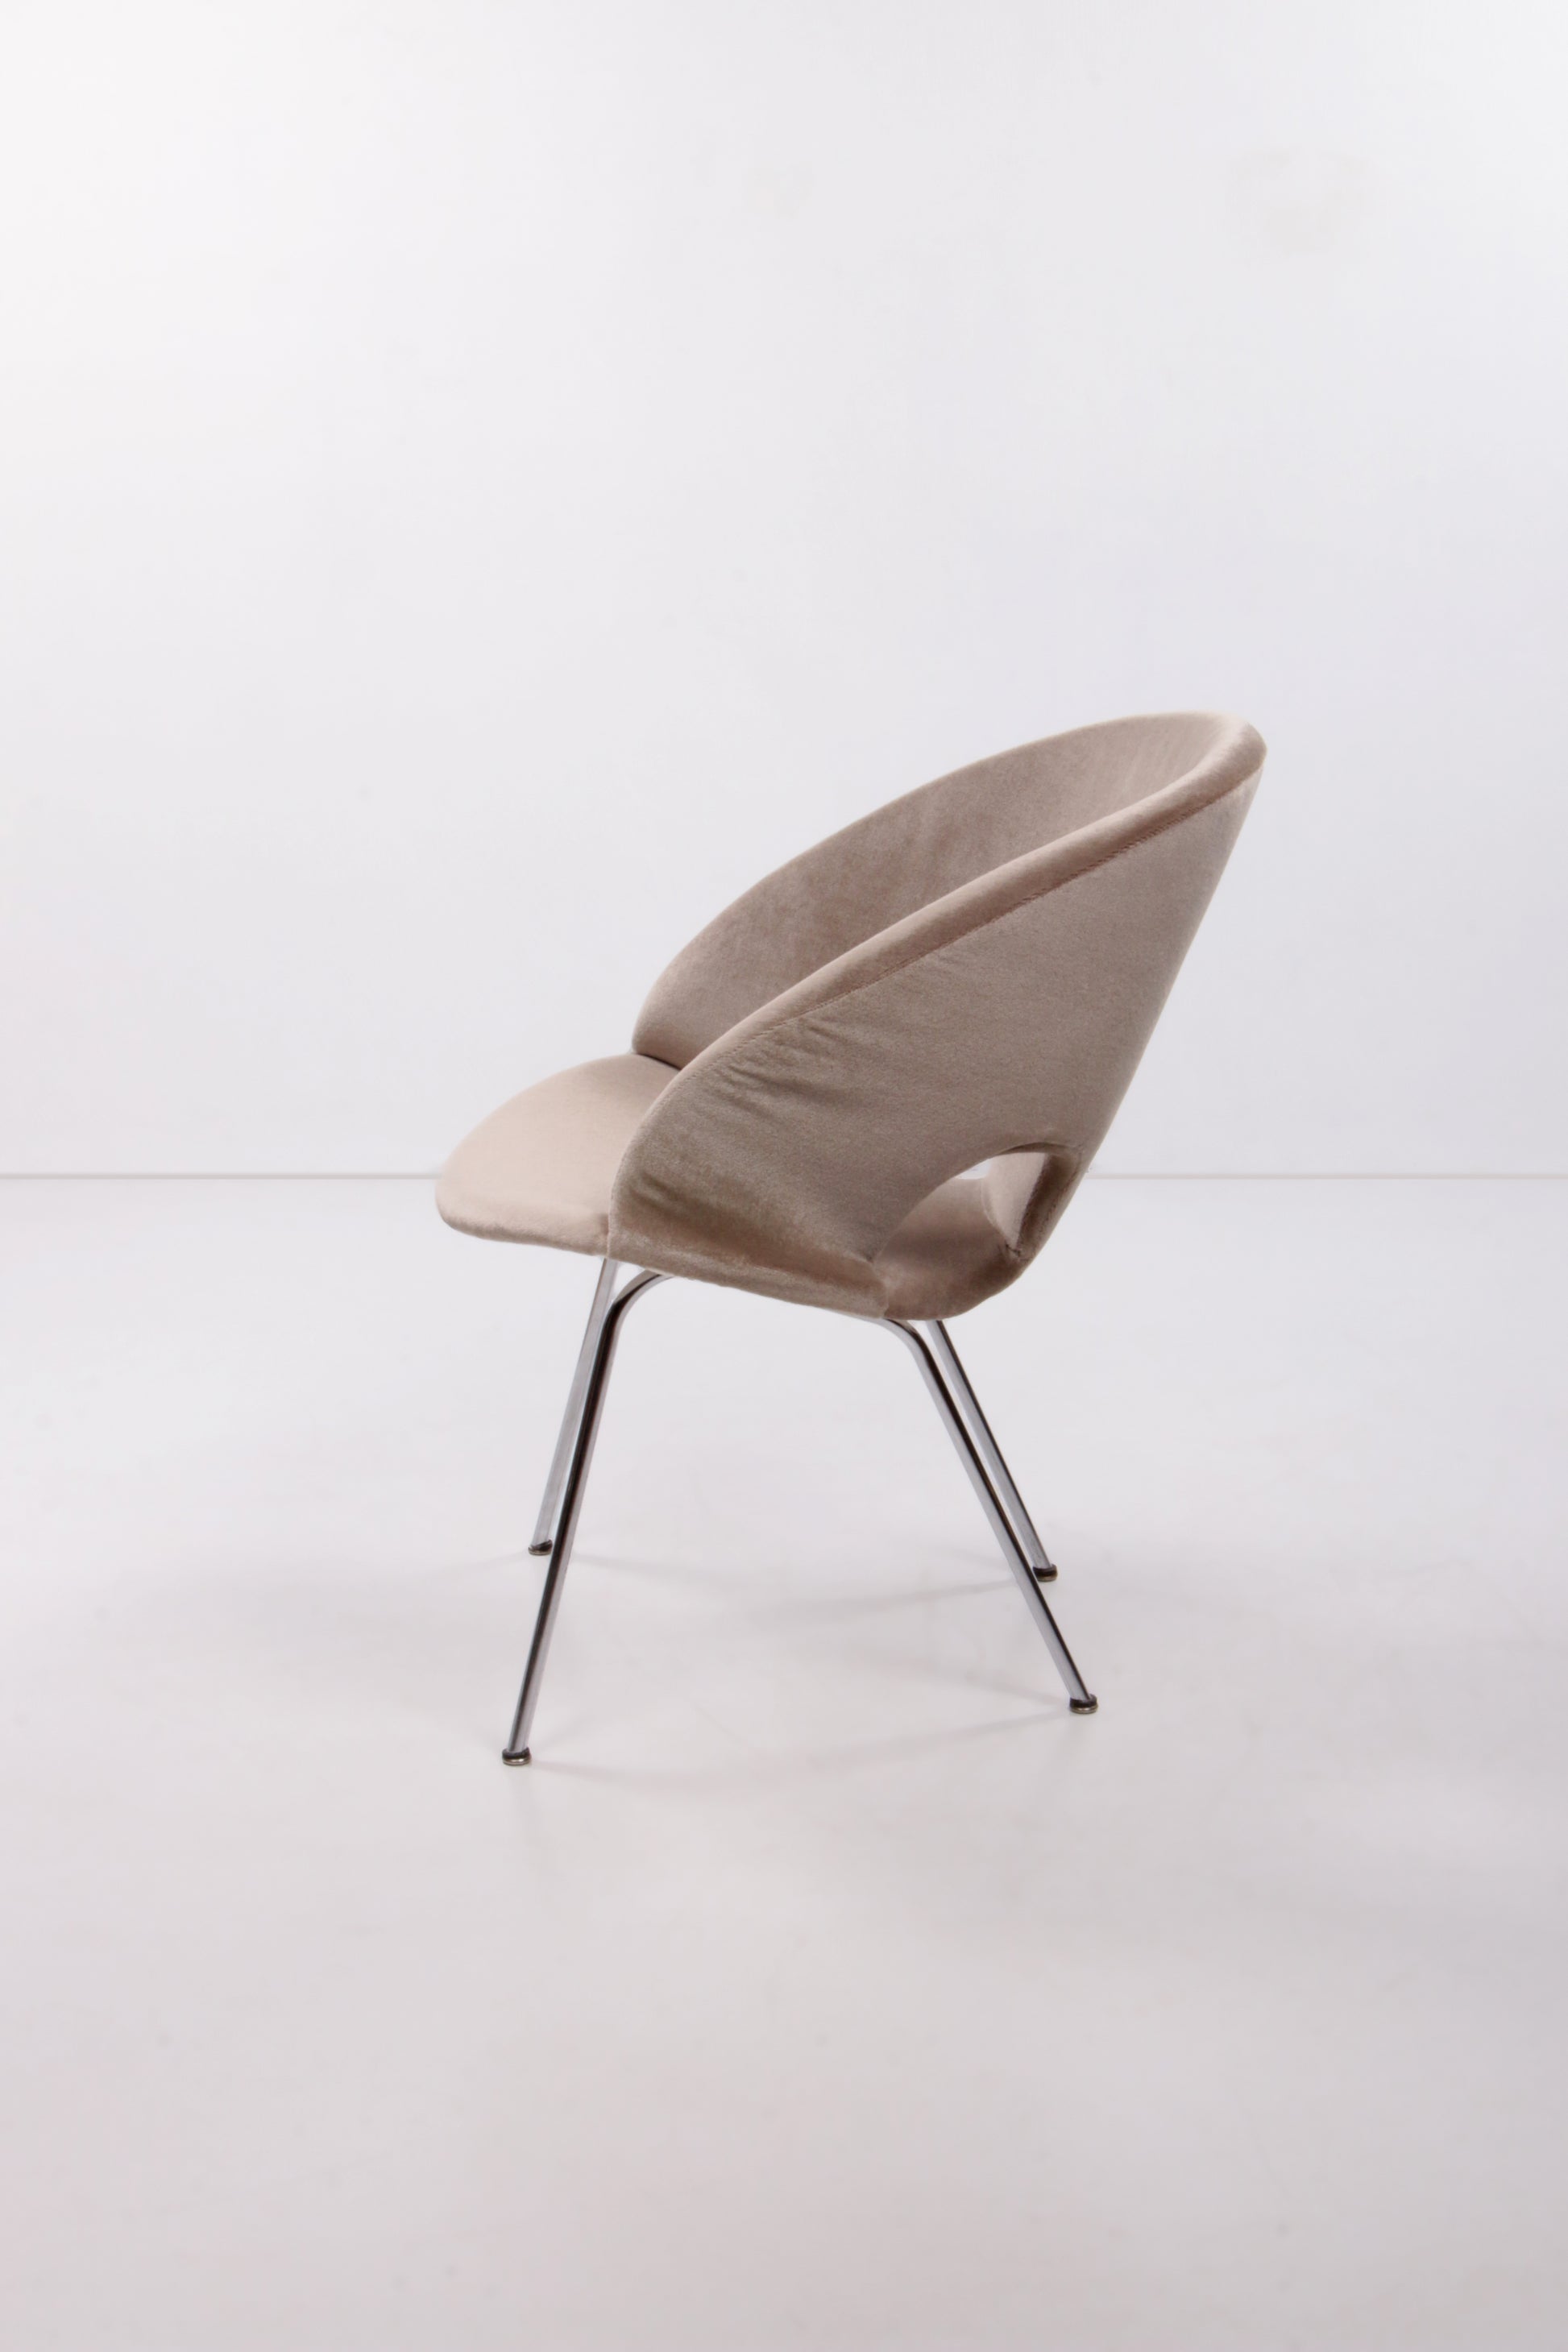 Model 350 Lounge Chair by Arno Votteler for Walter Knoll, 1950s